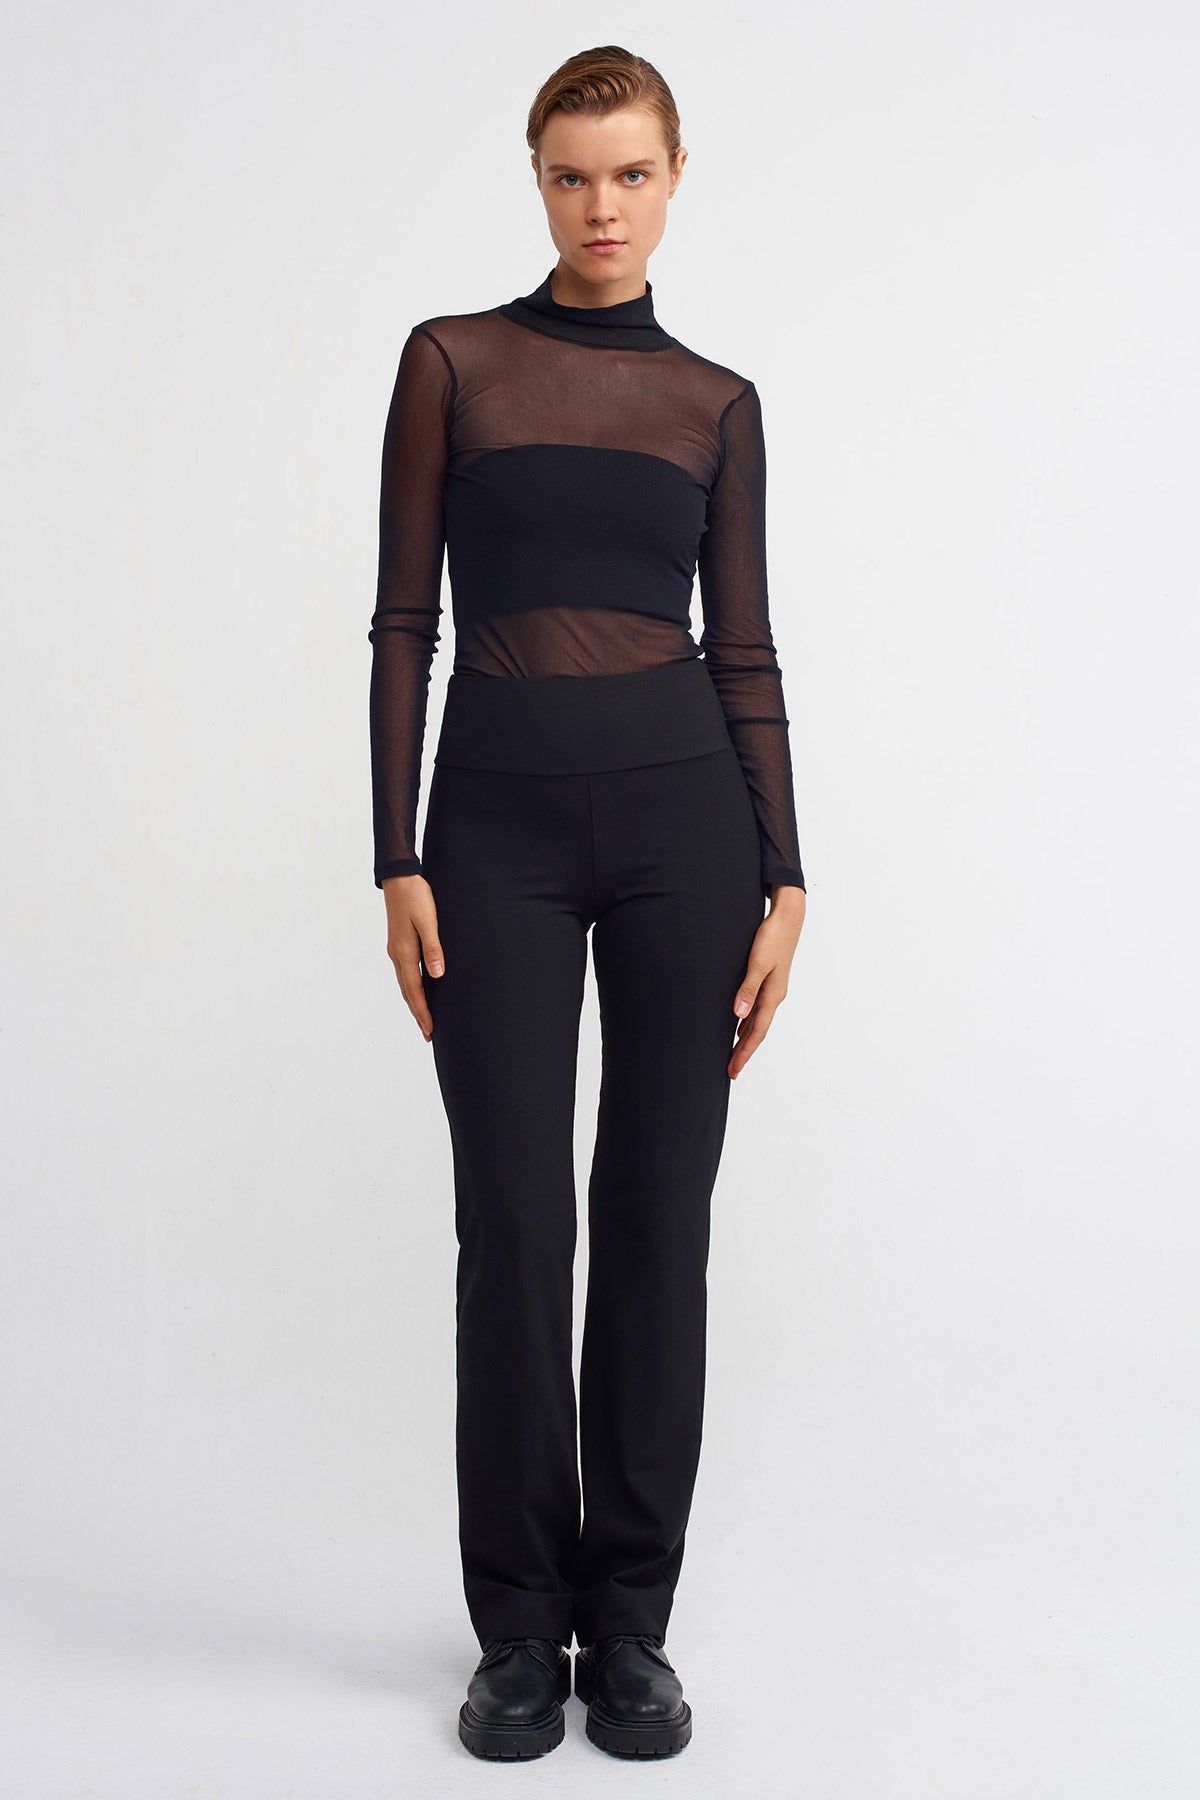 Black High-Waisted Comfort Trousers-K233013058